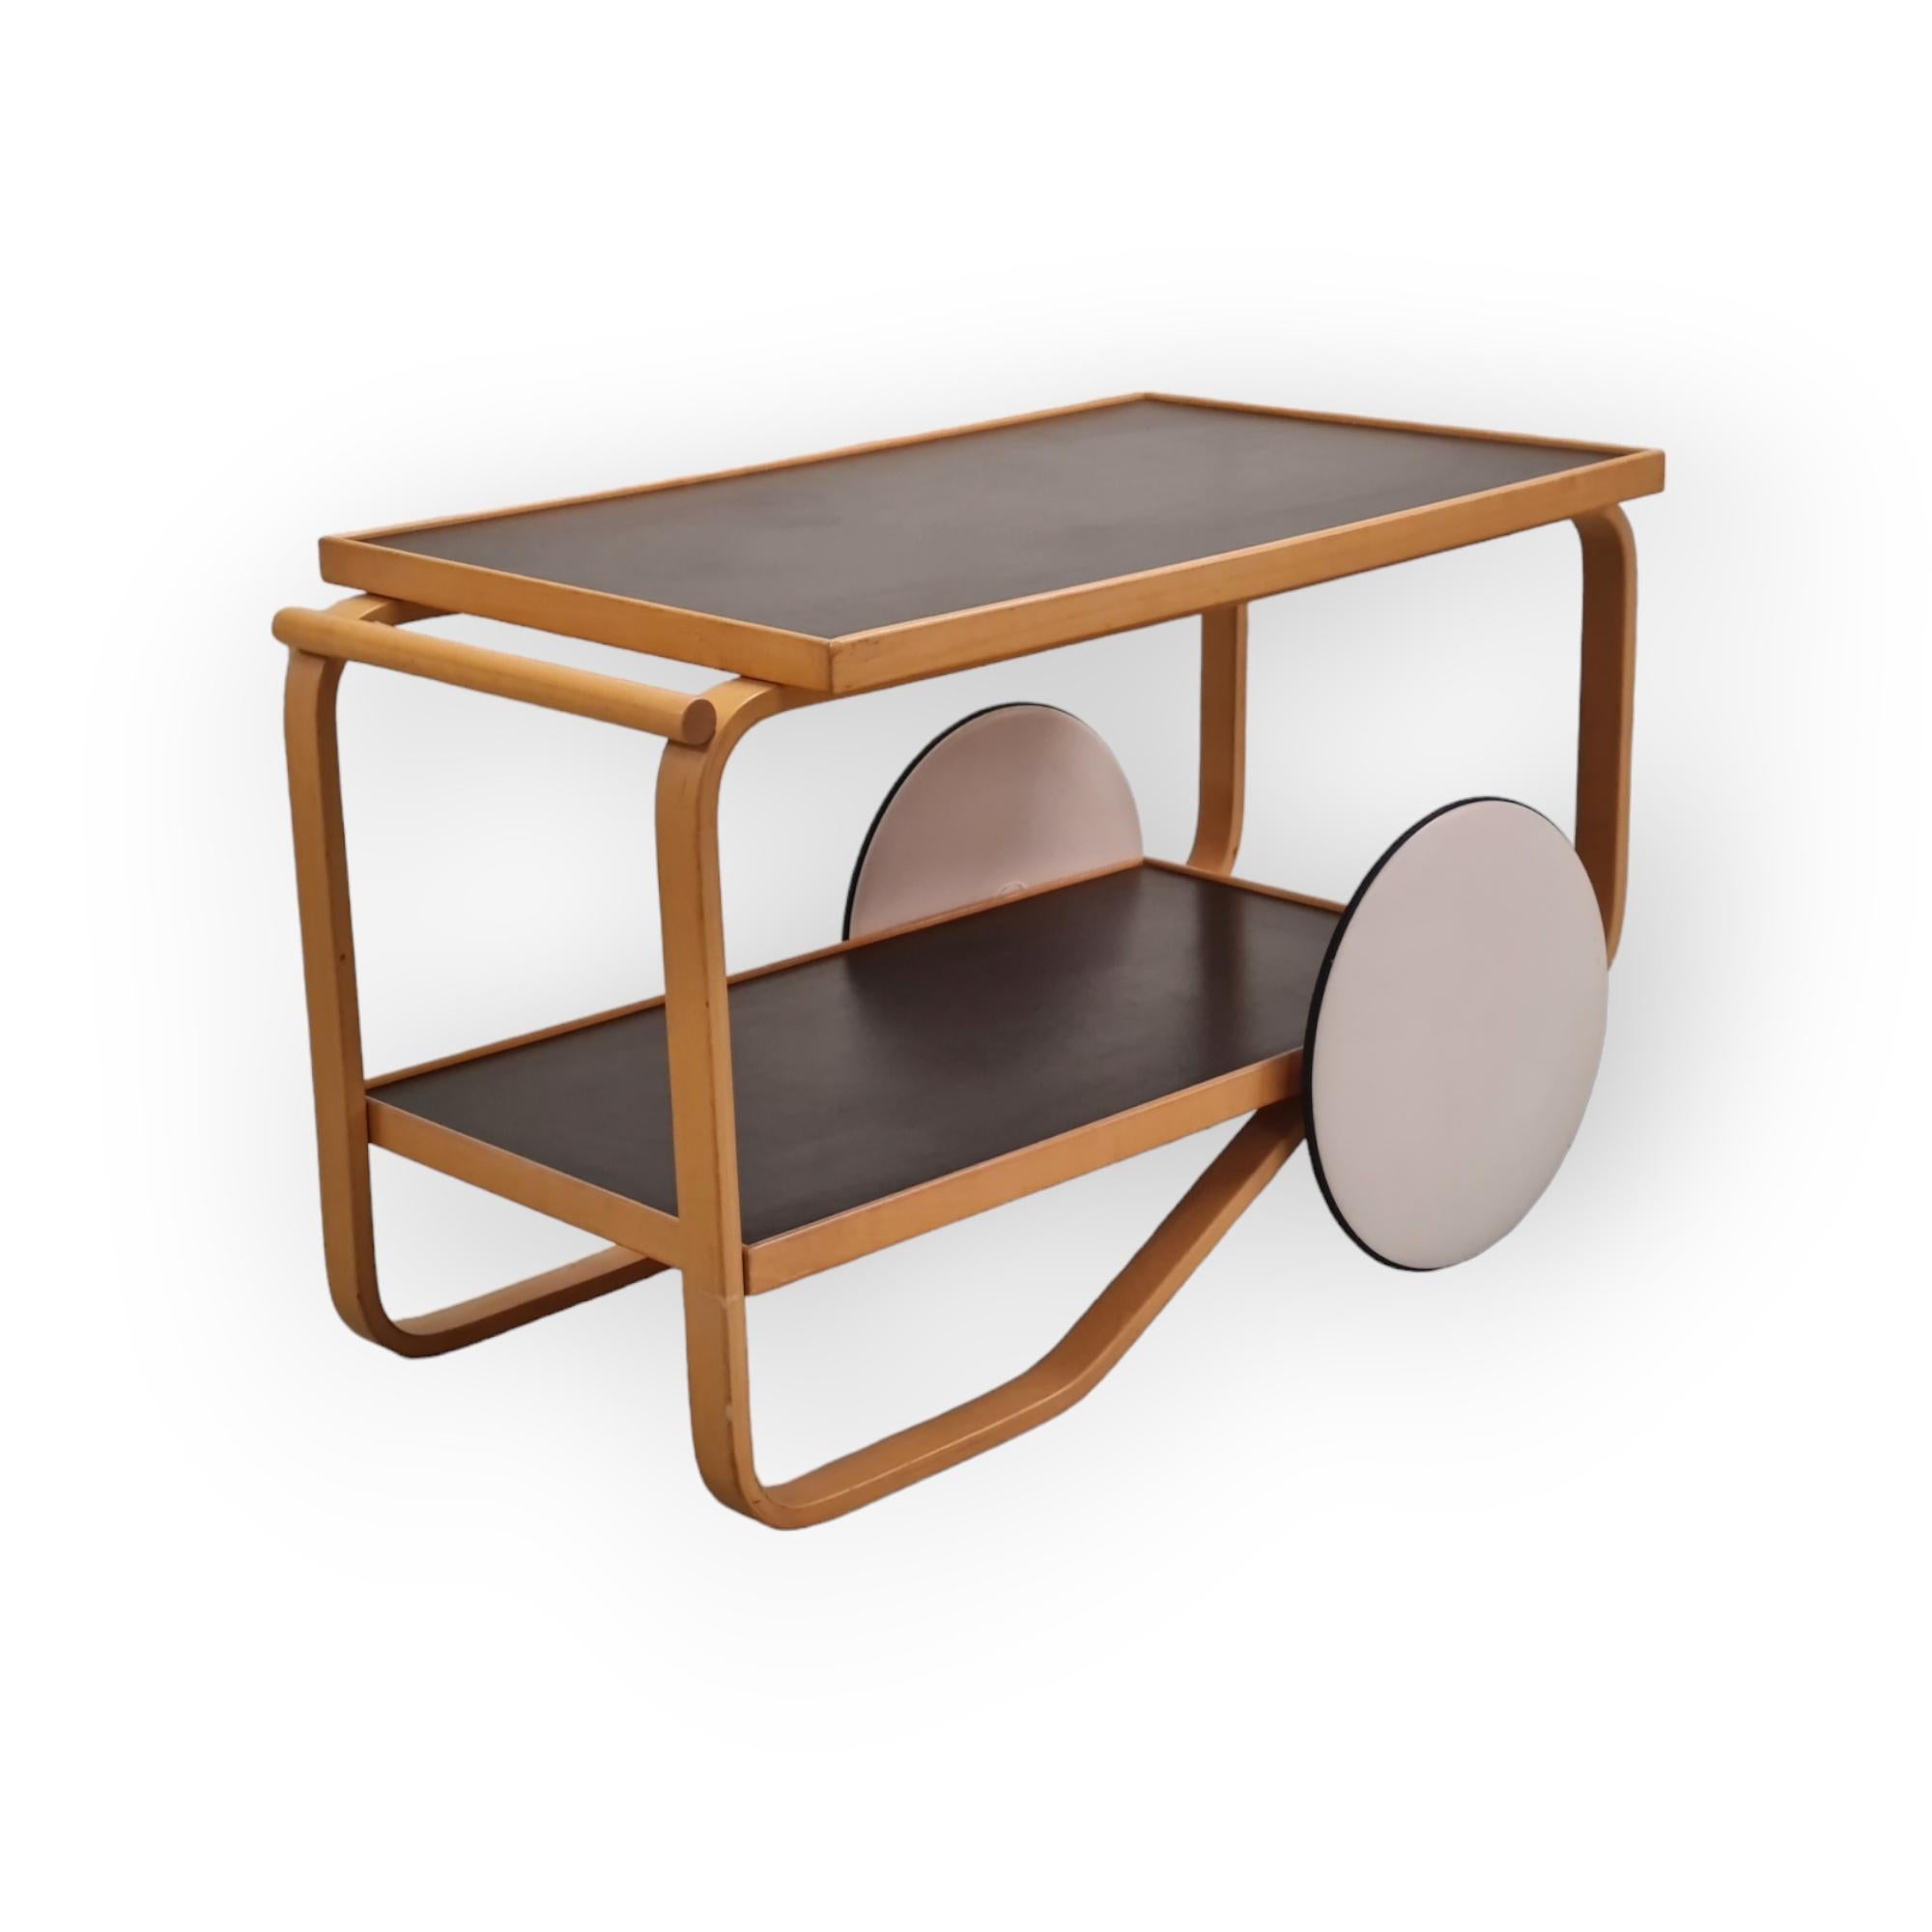 Alvar Aalto first introduced this model cart in the 1930s. It is one of the simplest of his cart series. Inspirations of the British tea culture as well as Japanese wood works are evident in this piece.
This simple yet elegant cart is easy to move